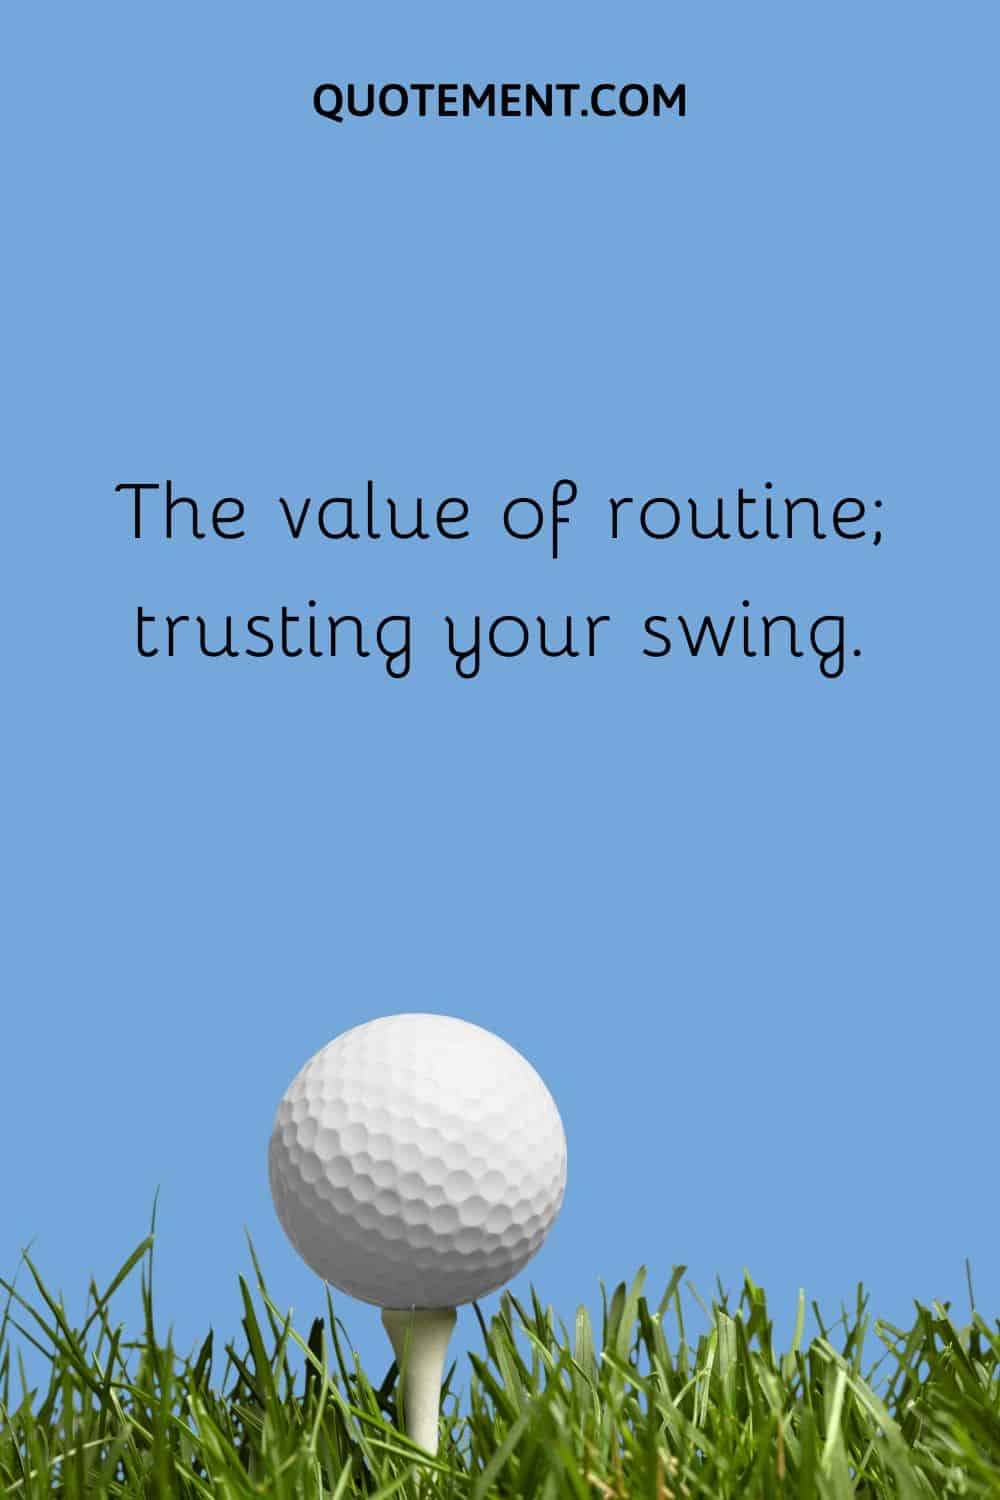 The value of routine; trusting your swing.